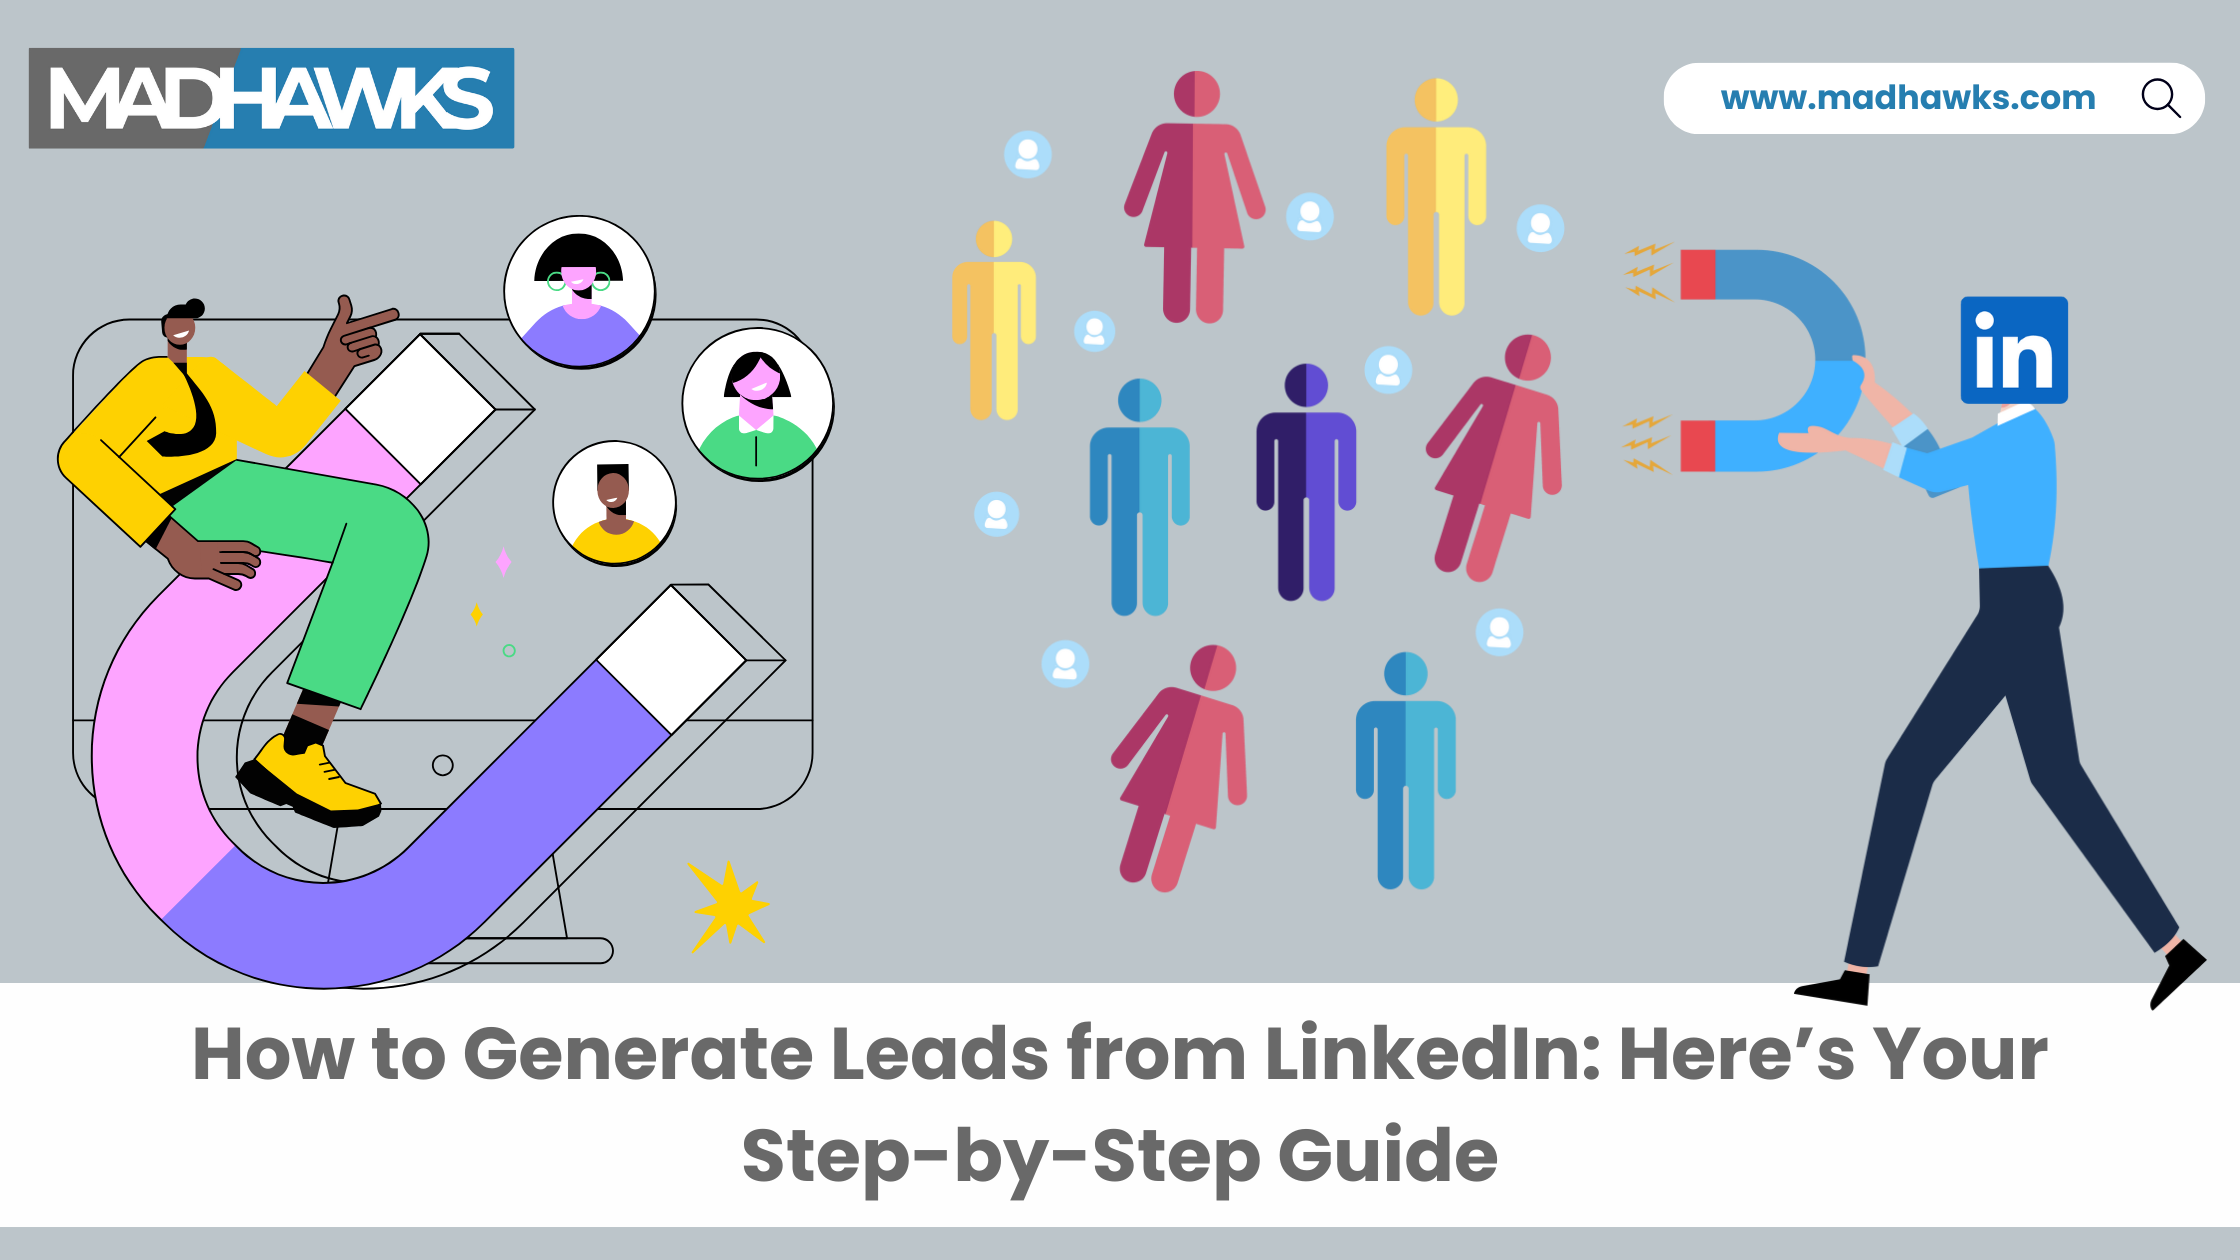 How to Generate Leads from LinkedIn: Here’s Your Step-by-Step Guide